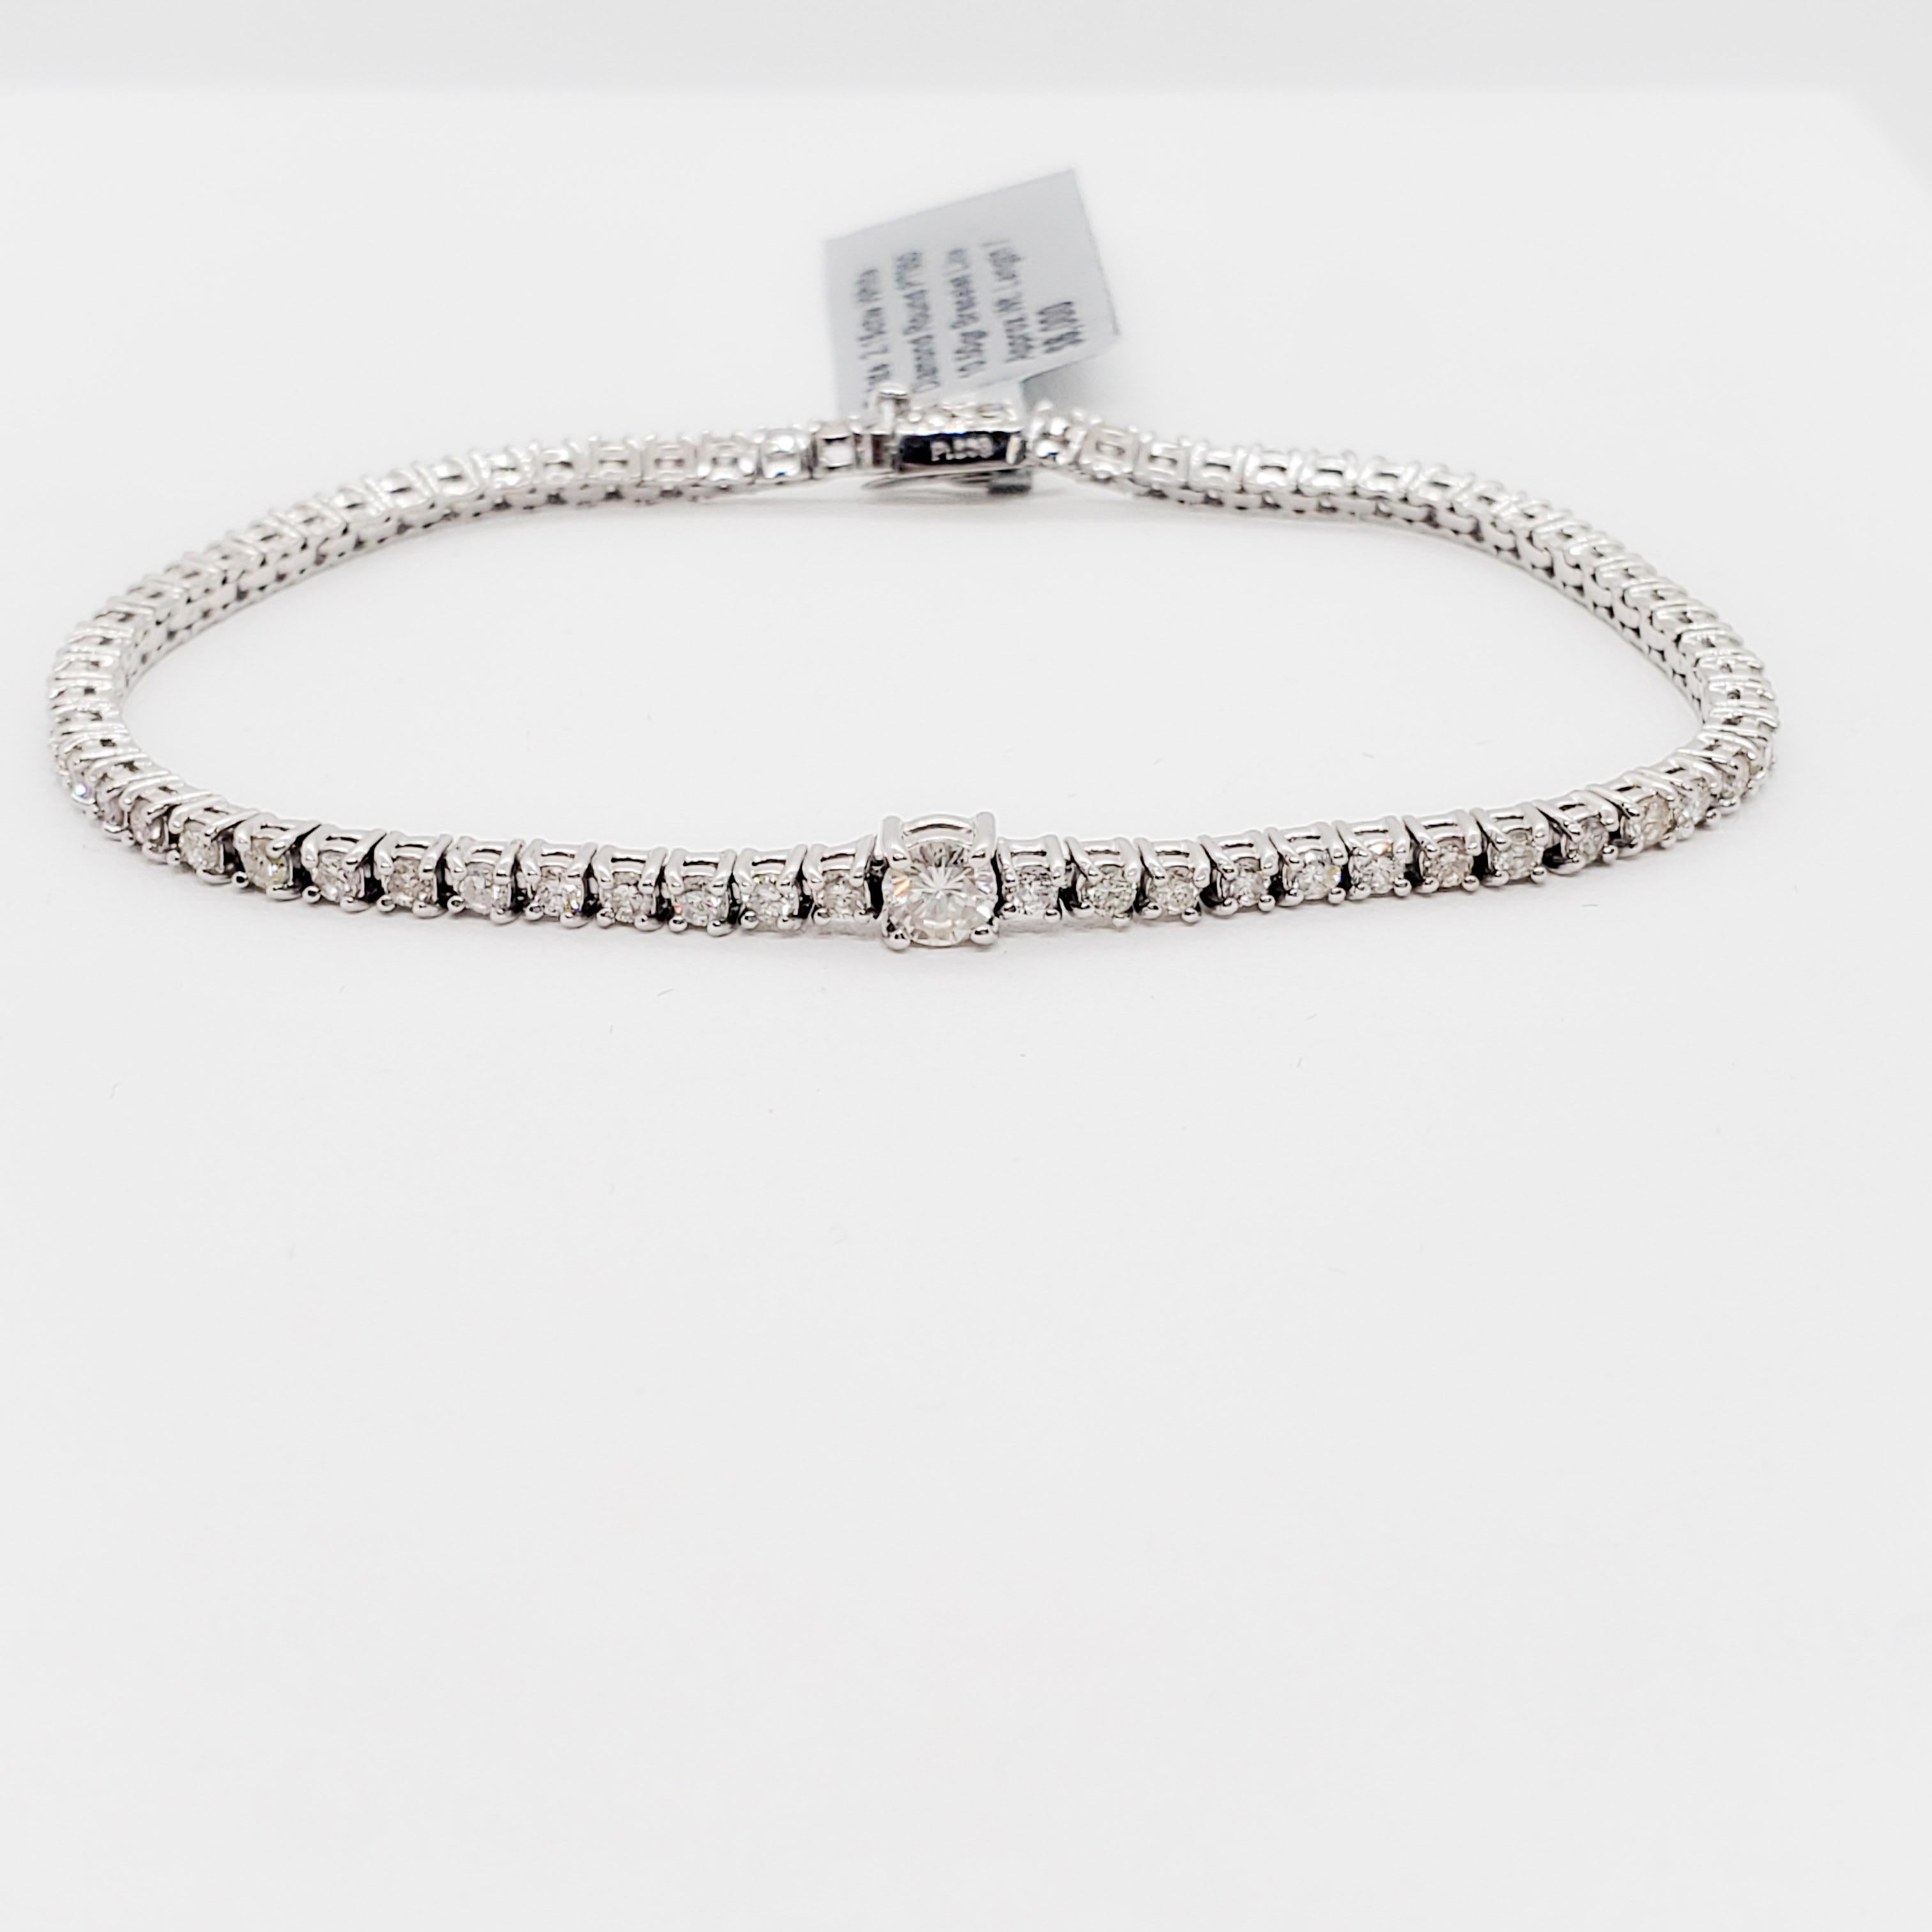 Classic with a modern twist, this bracelet has 2.15 carats of good quality white and bright diamonds. Handmade mounting in platinum. Length of bracelet is 7